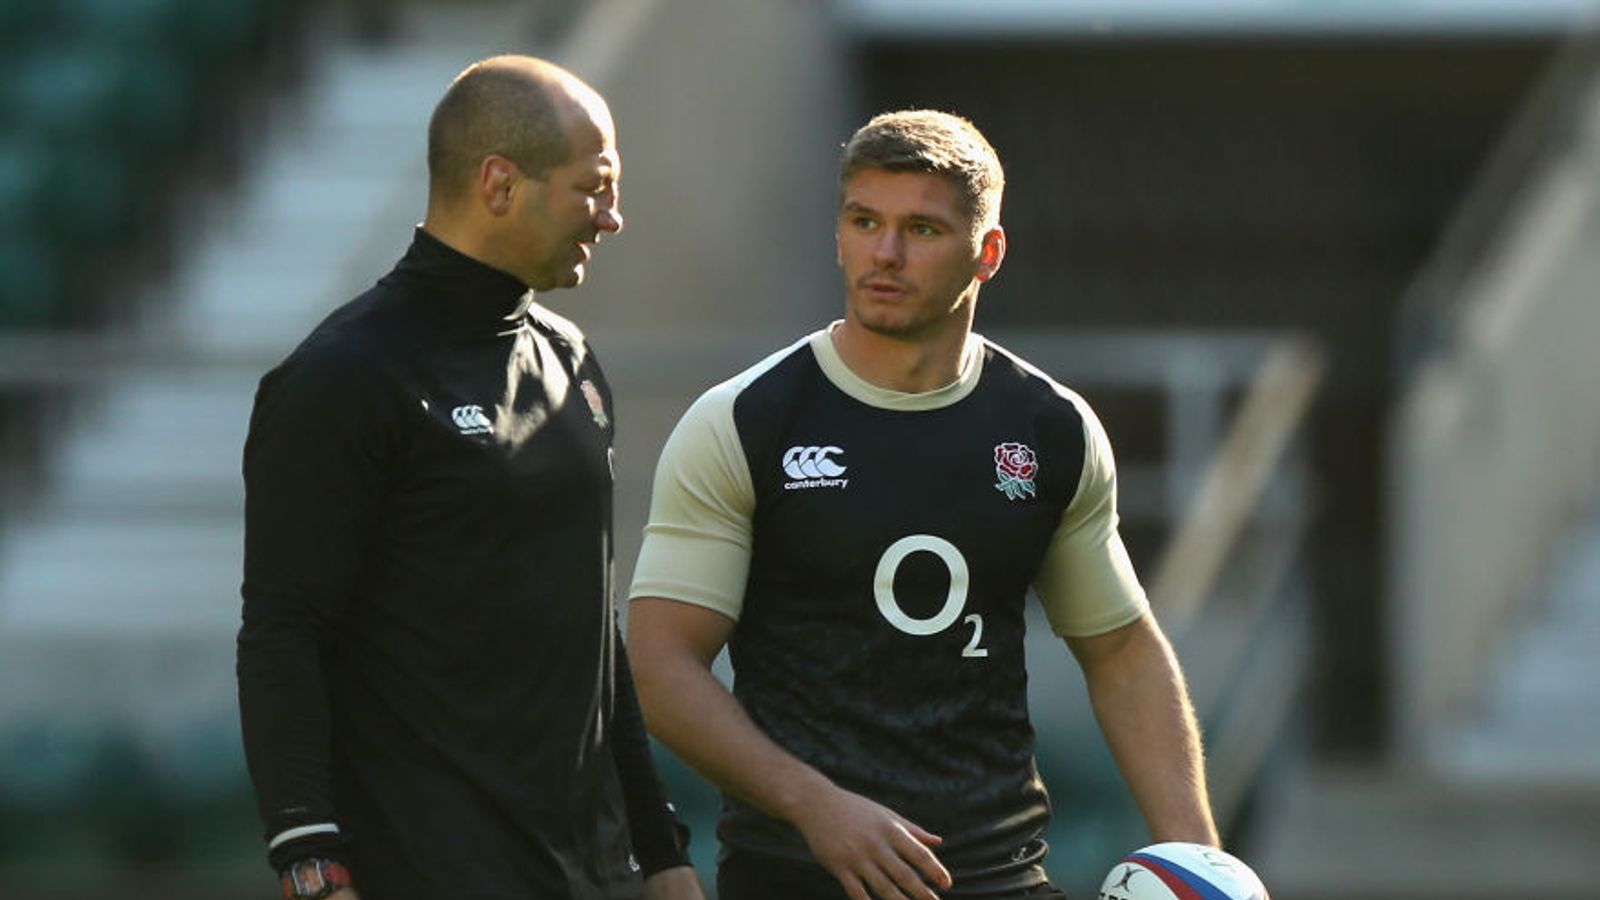 Six Nations: Owen Farrell happy to play anywhere in 'balanced' England side as Scotland await in Twickenham opener